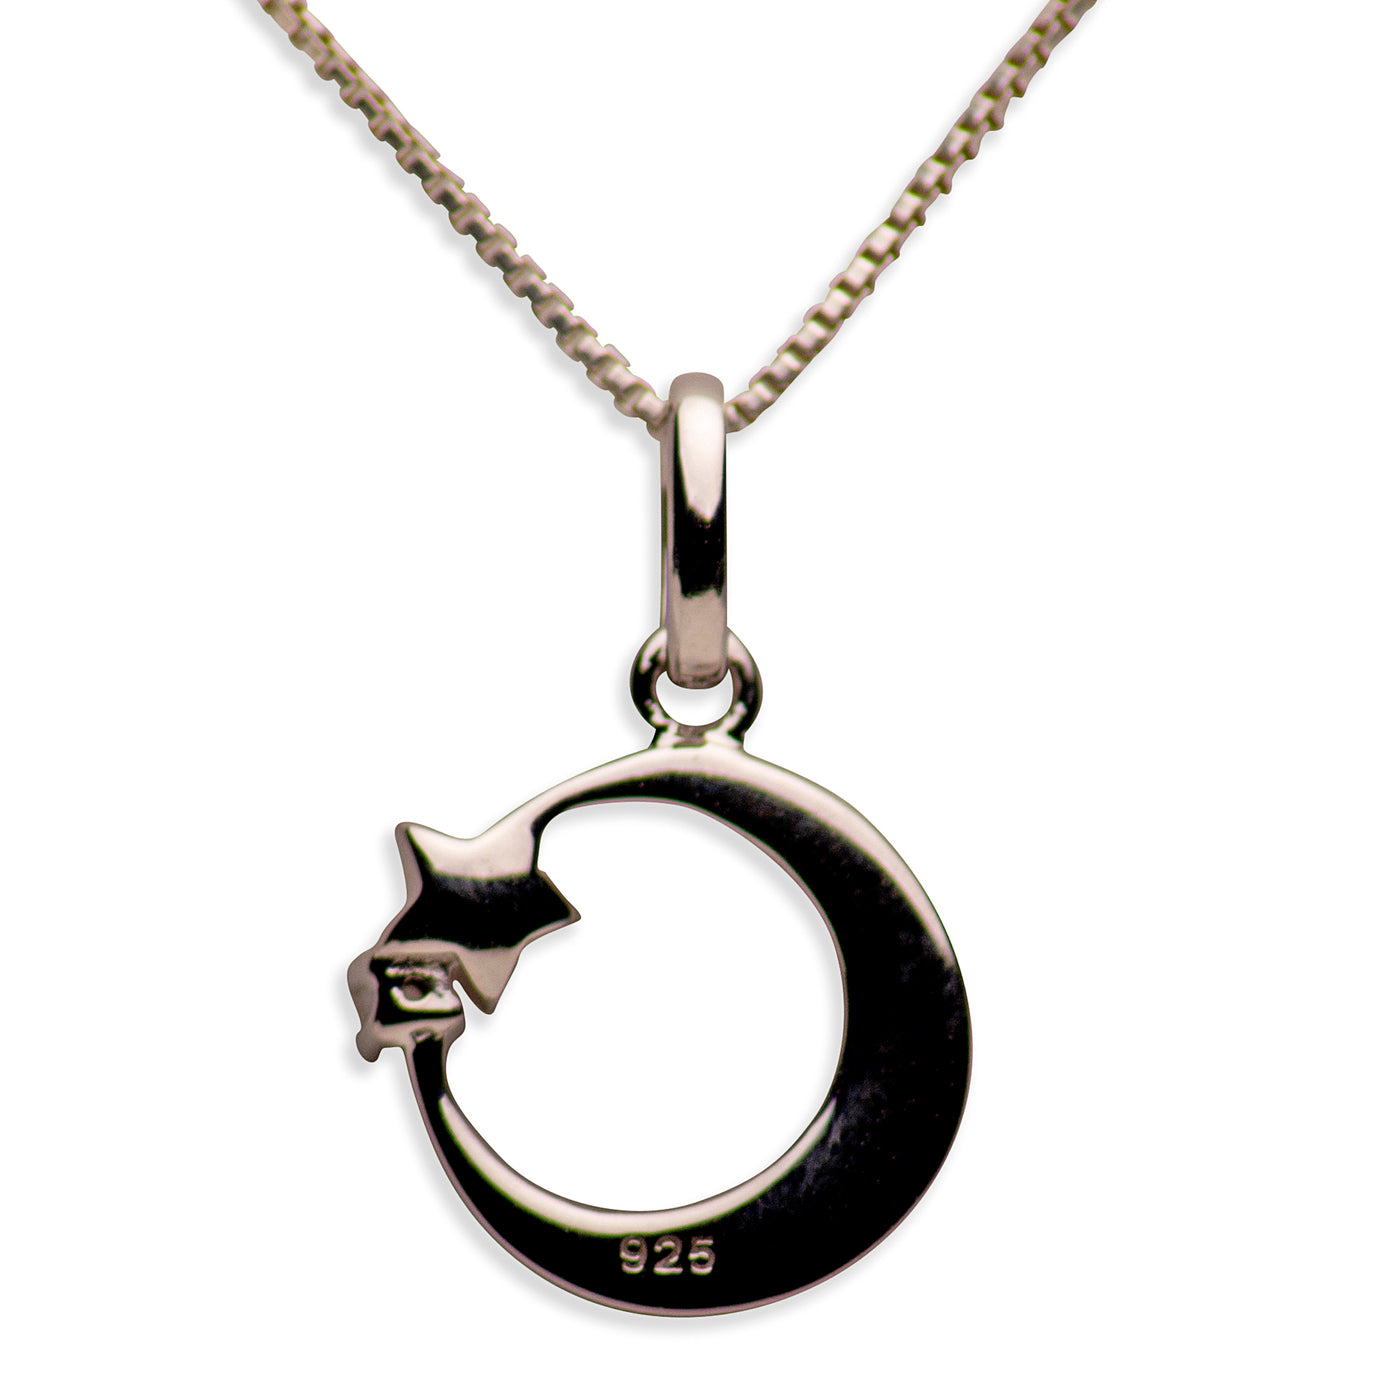 14K Gold Plated Sterling Silver 3D Moon & Start Pendant Necklace